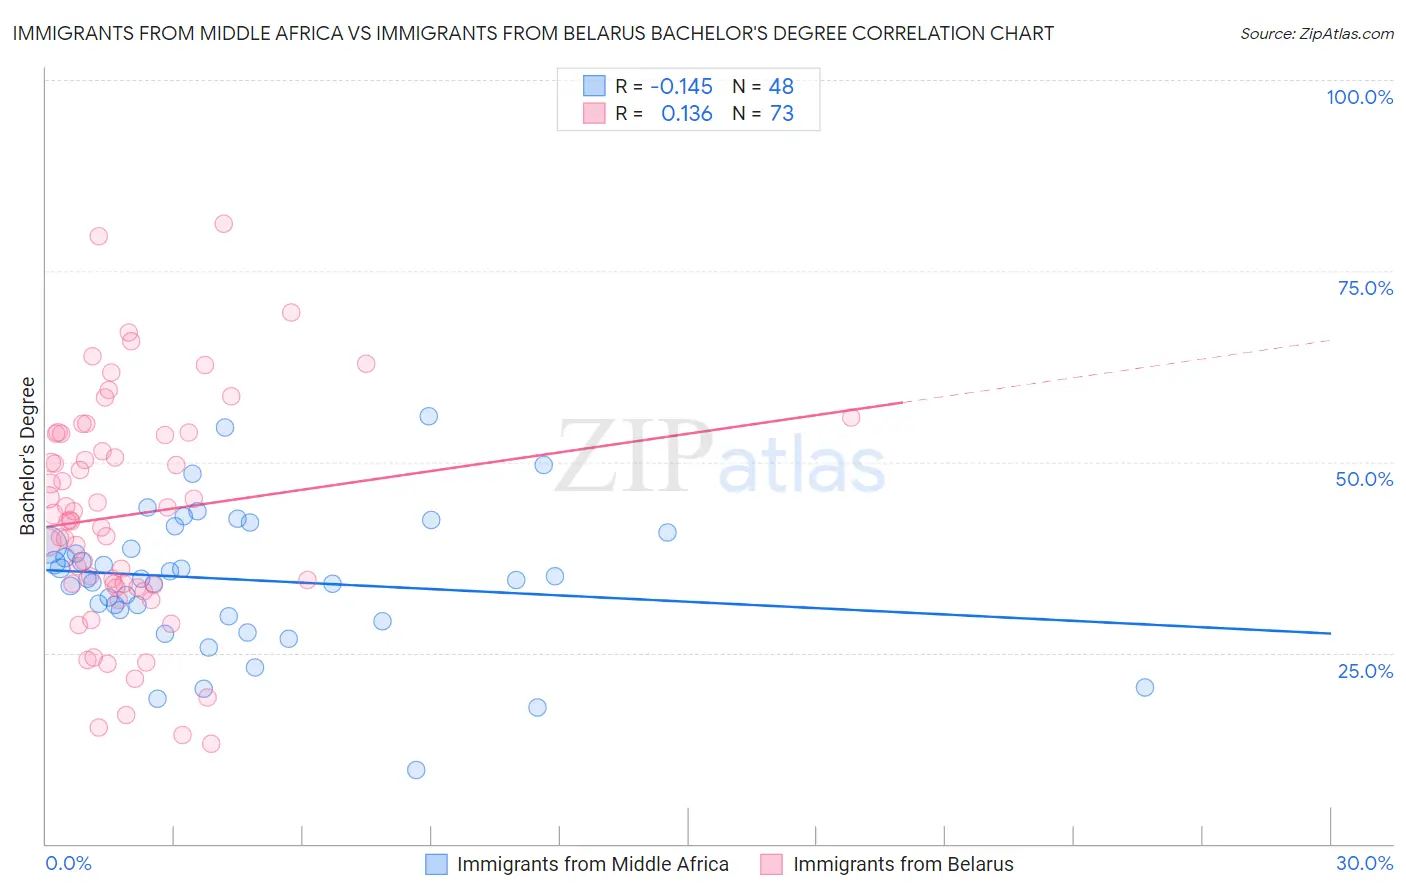 Immigrants from Middle Africa vs Immigrants from Belarus Bachelor's Degree